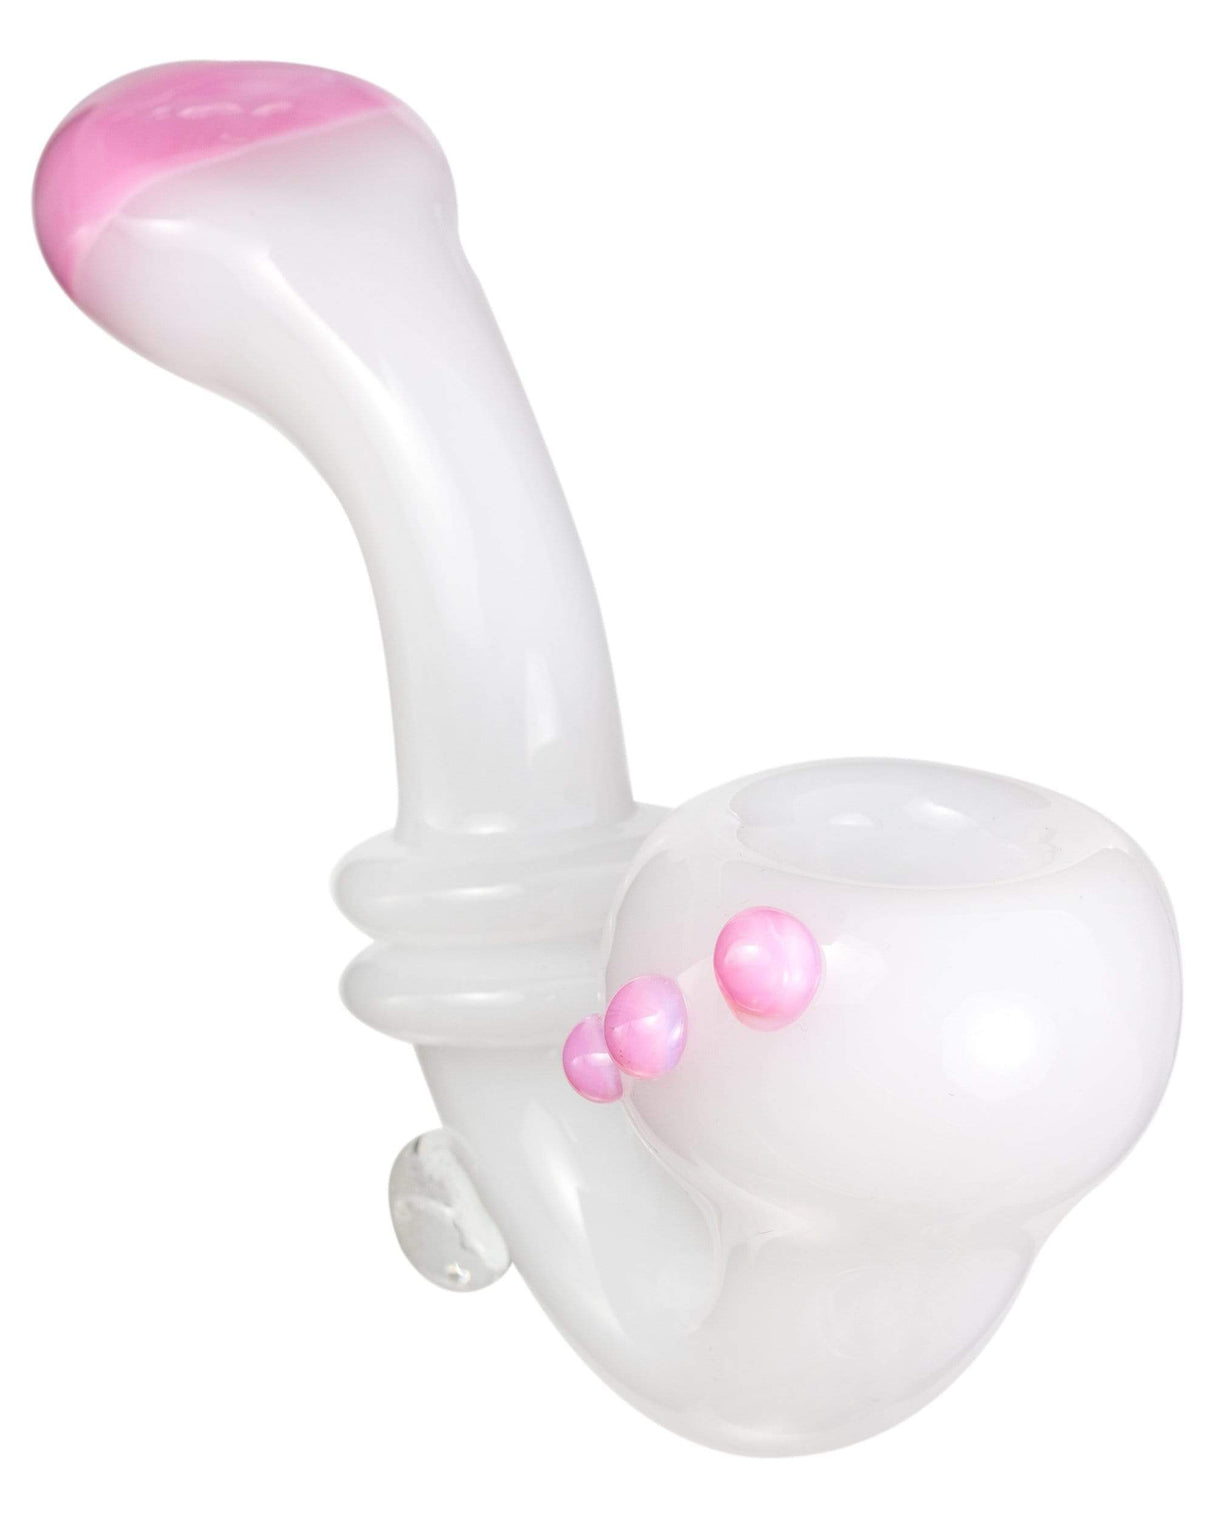 Valiant Distribution Maria Ring Sherlock Hand Pipe in Pink & White - Compact 4.5" Glass Spoon Design